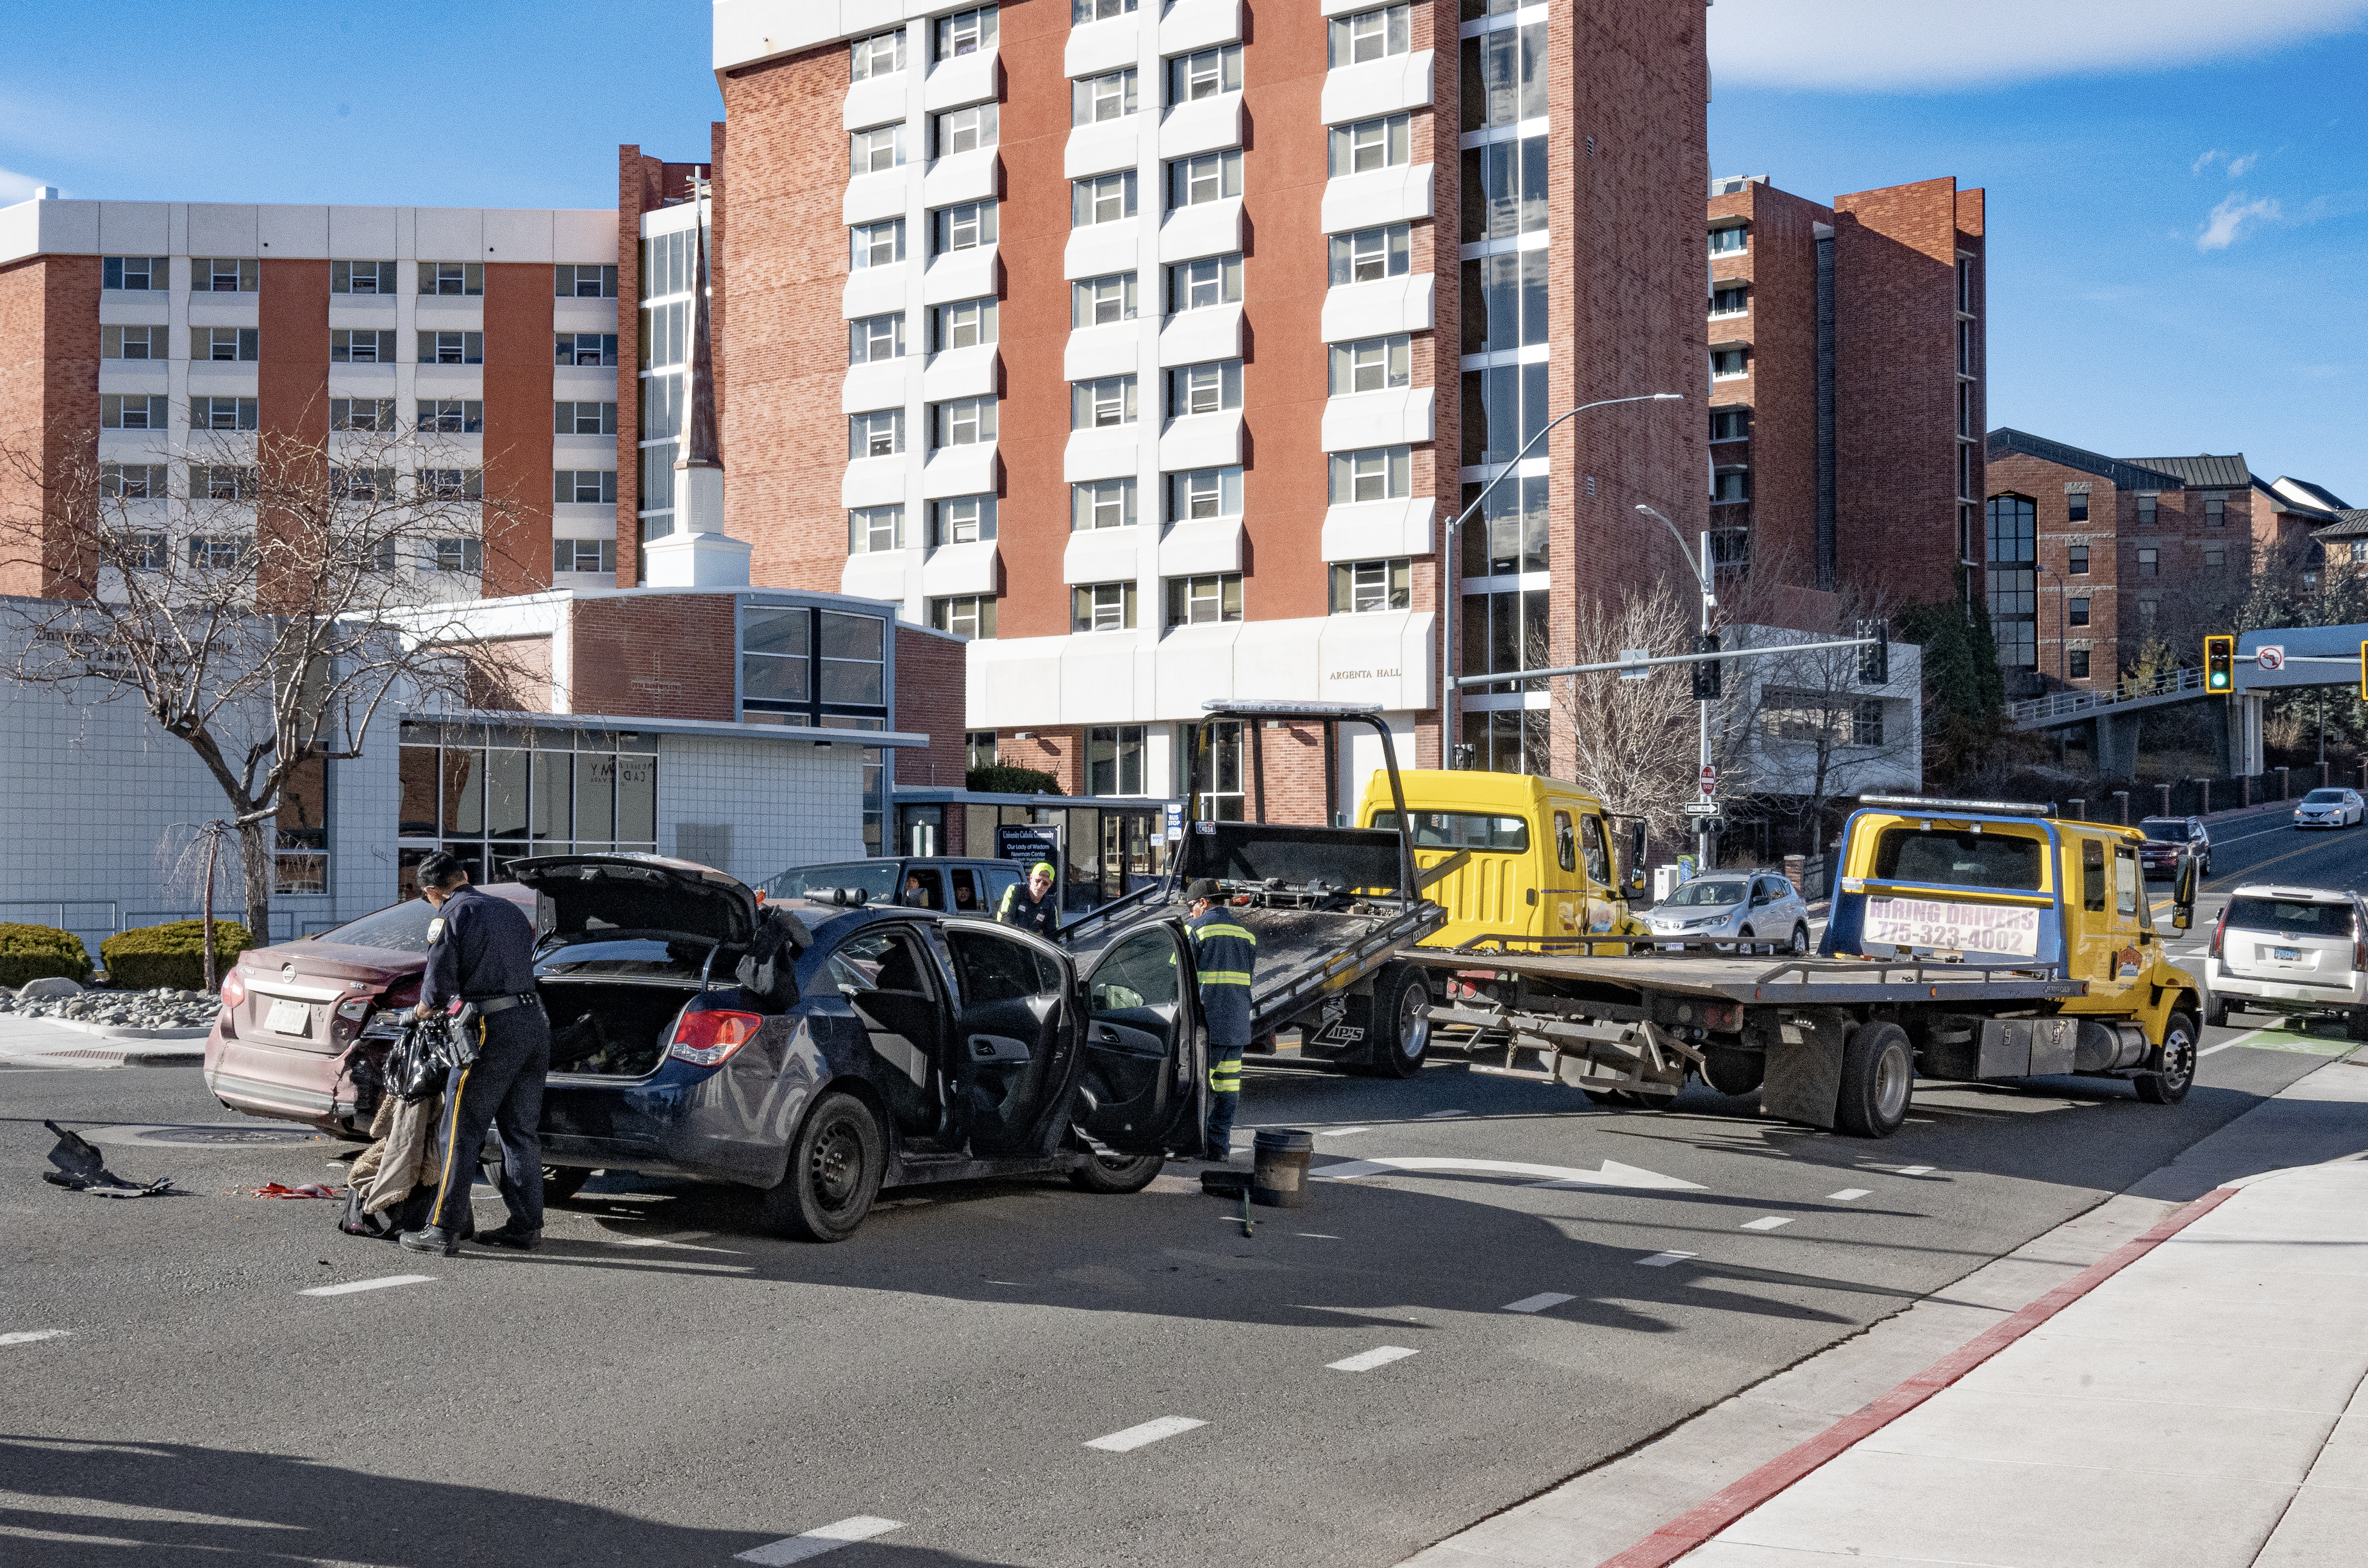 Three car hit-and-run, perpetrator detained on campus